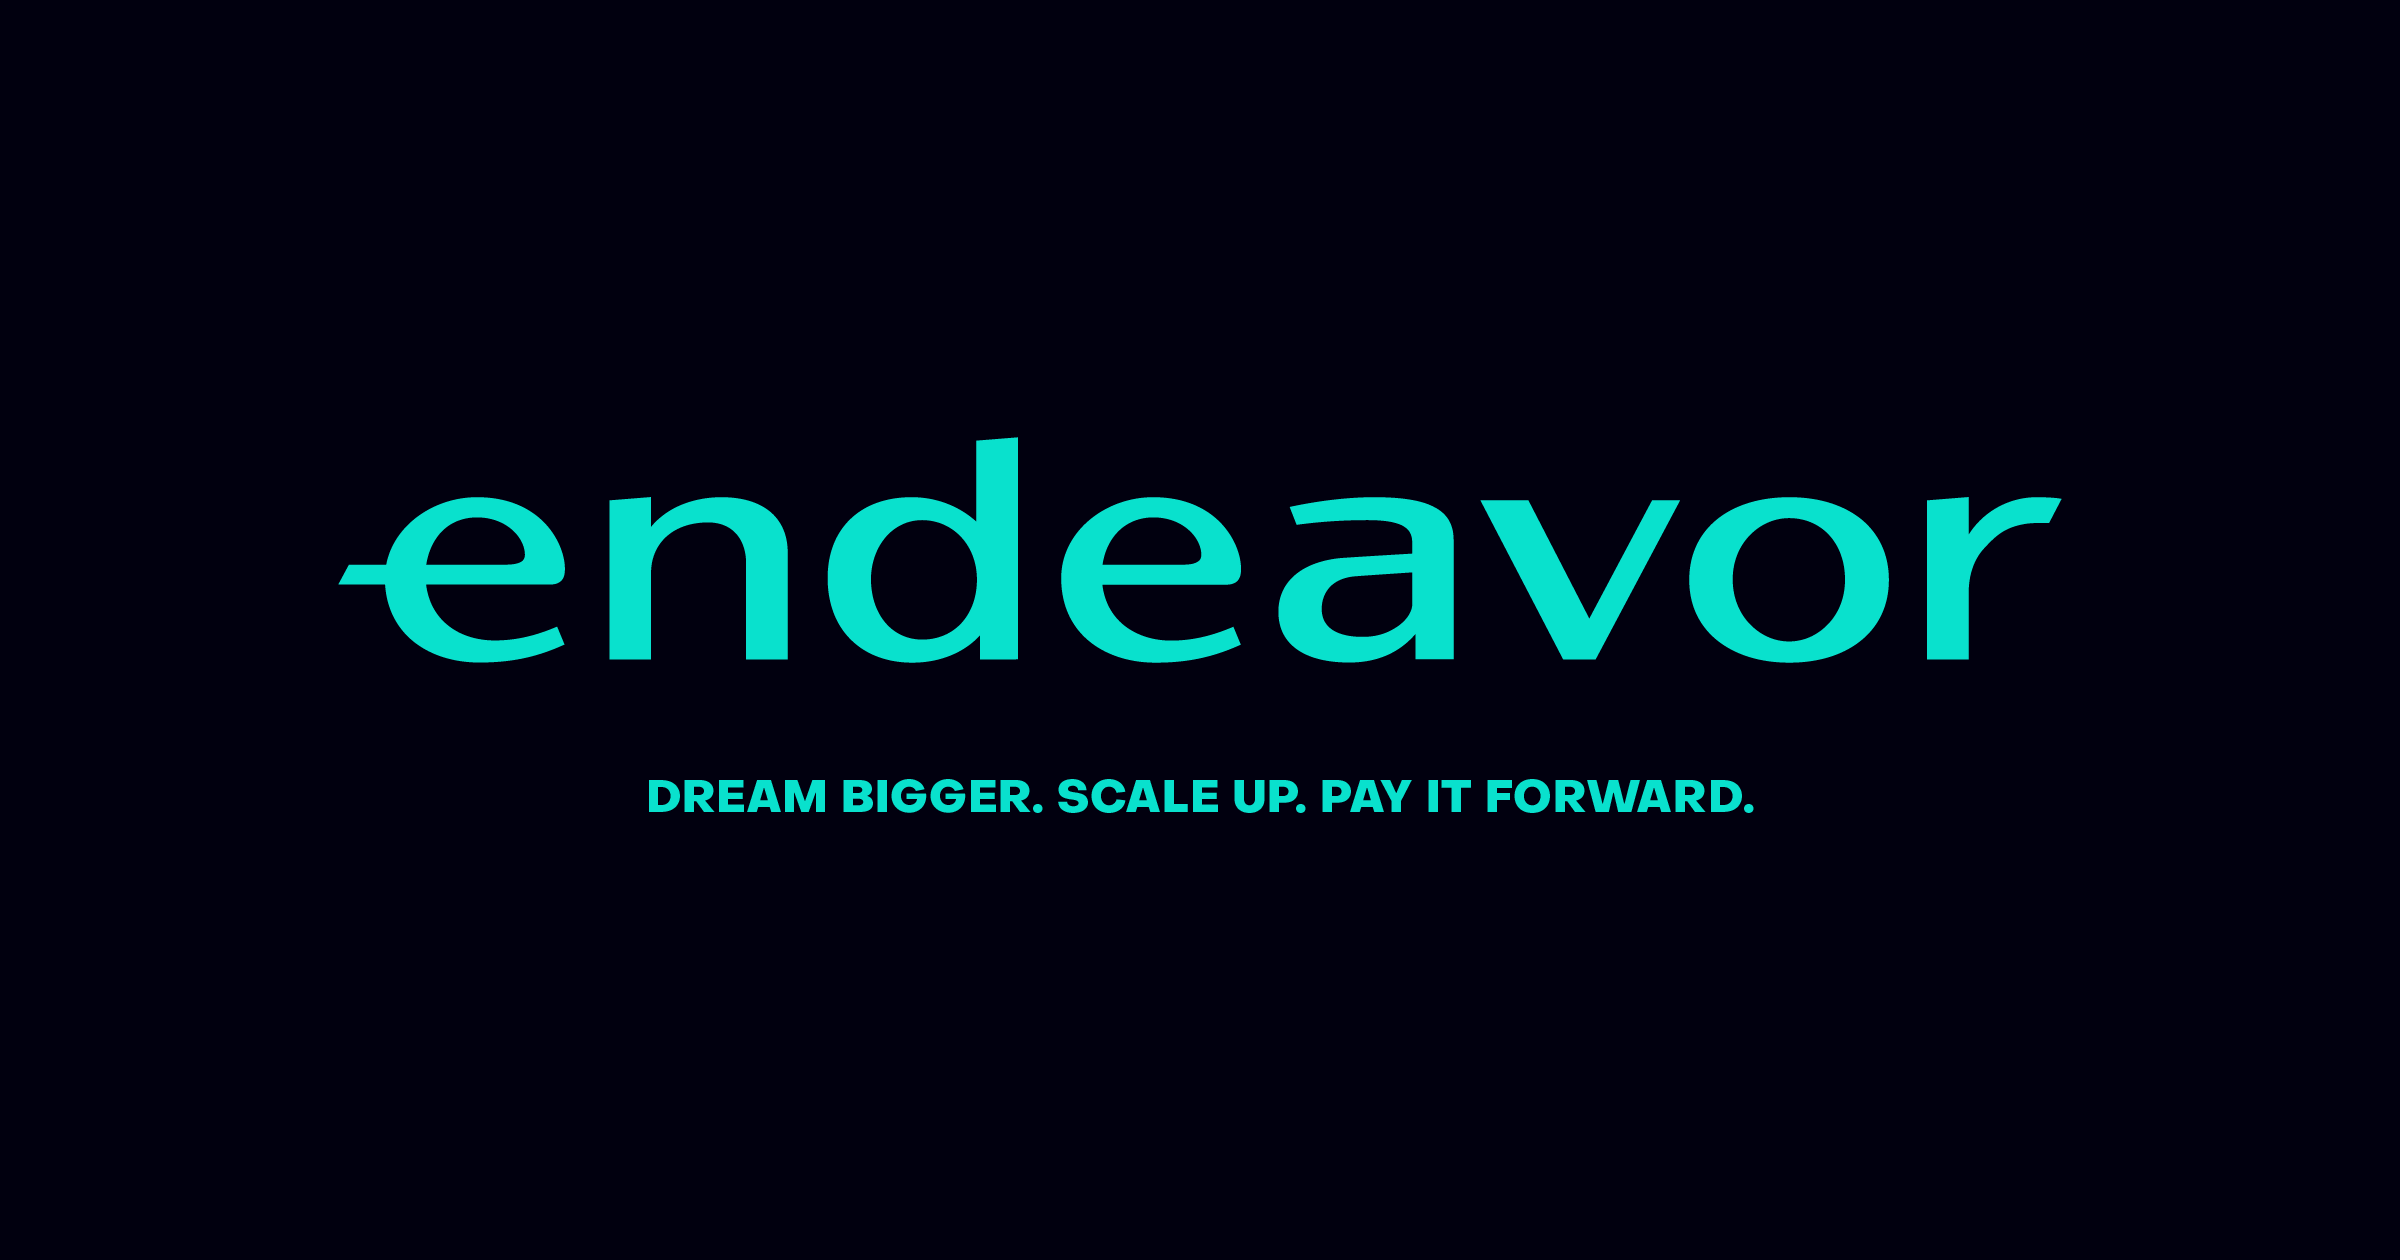 Endeavor - Dream Bigger. Scale Faster. Pay it Forward.